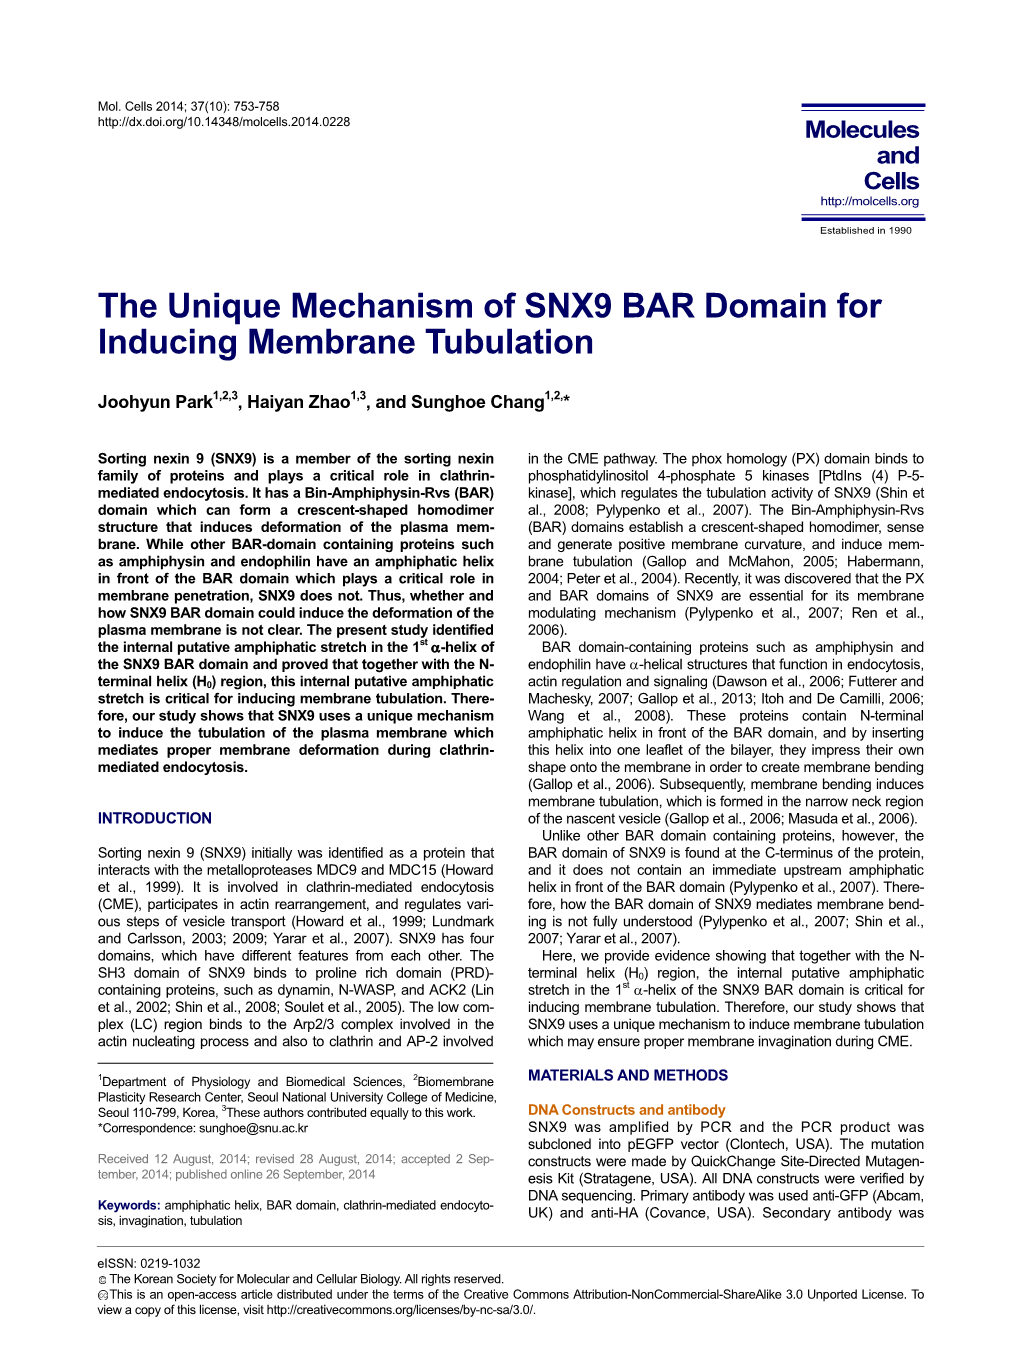 The Unique Mechanism of SNX9 BAR Domain for Inducing Membrane Tubulation